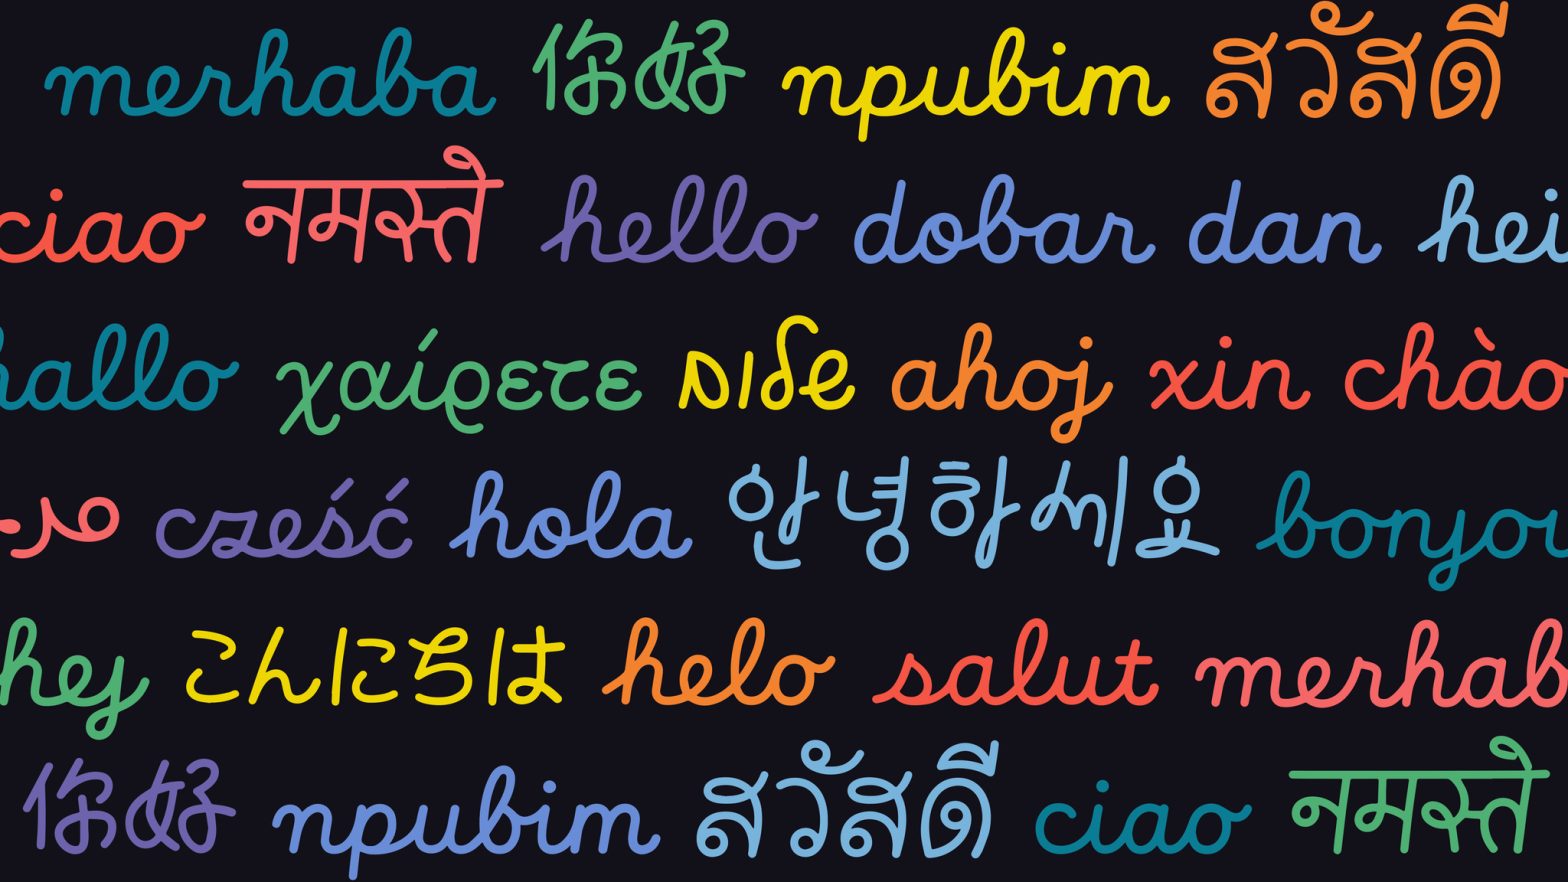 The word “hello” written in many different languages and colors.